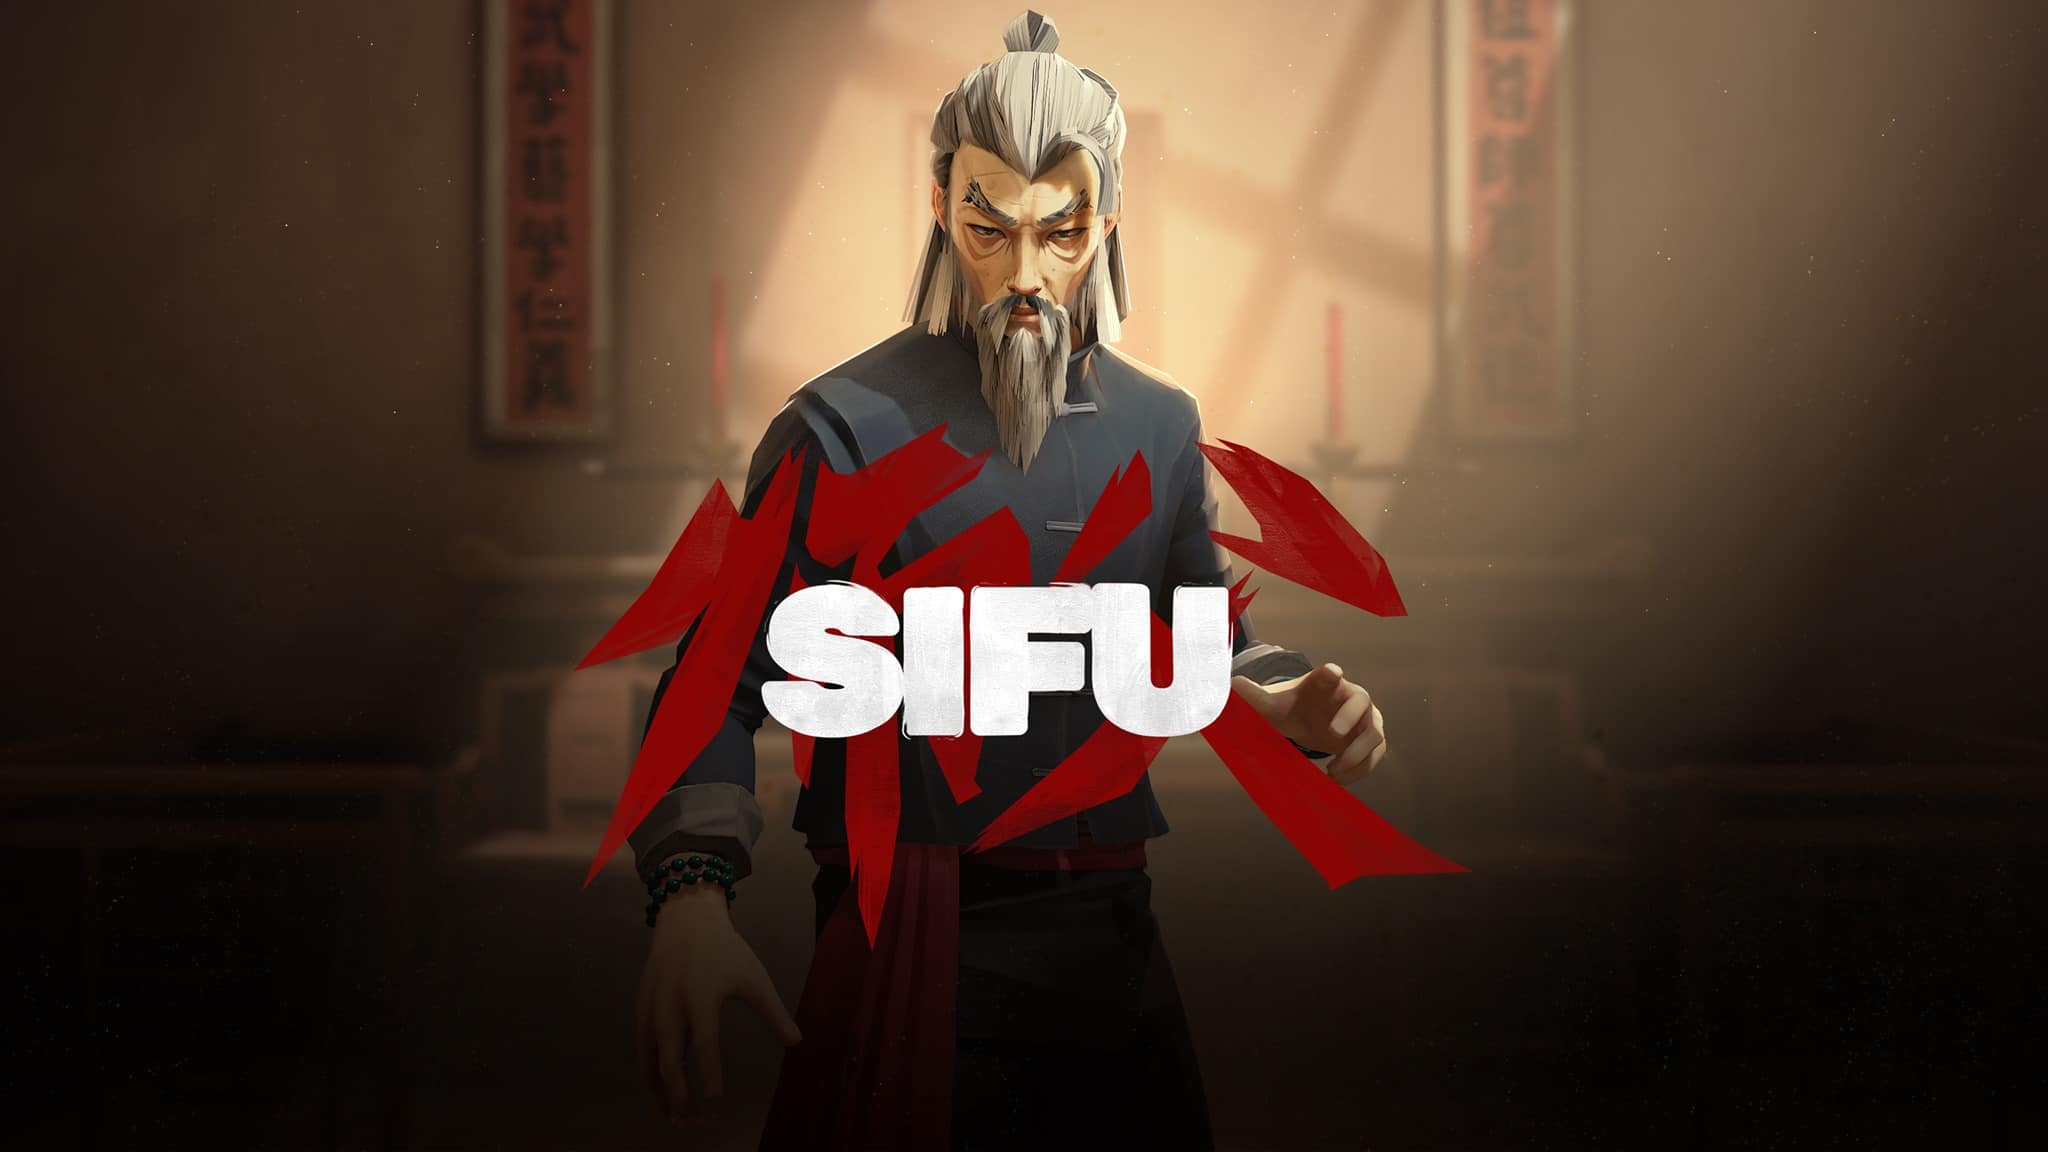 Sifu’s martial arts are shown in a new gameplay, but the